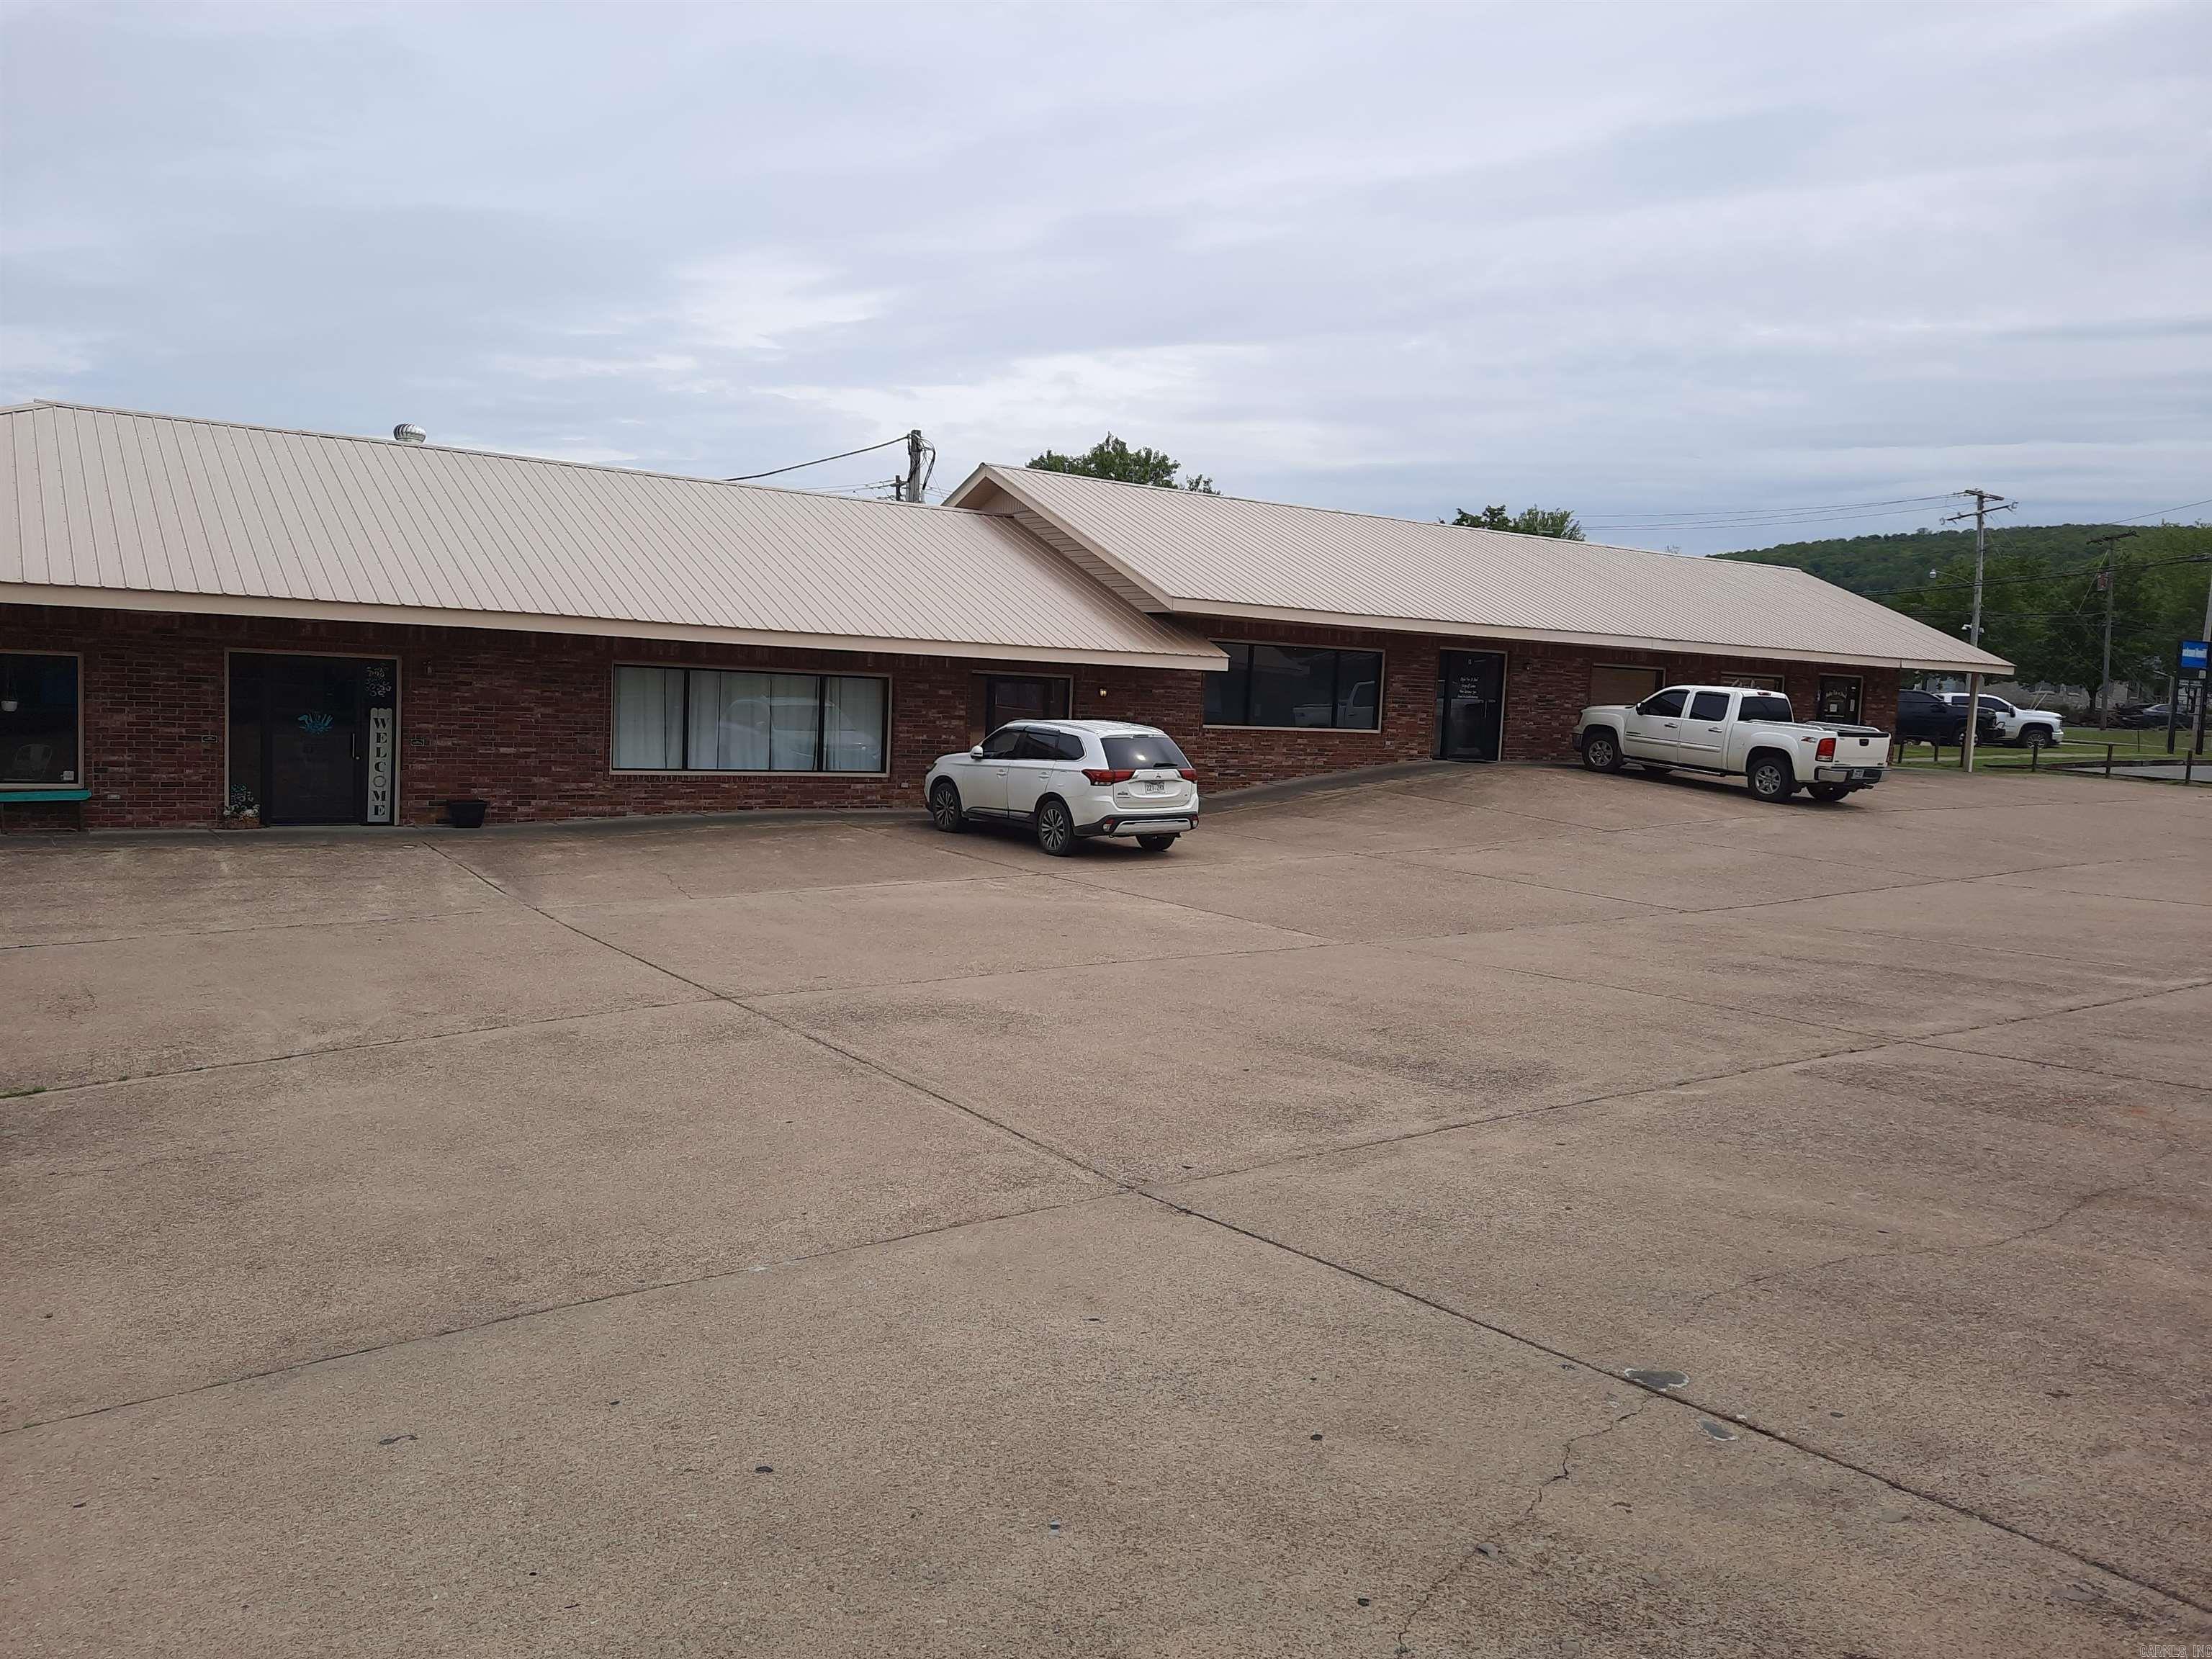 Commercial / Industrial for sale – 211 & 213 E Washington   Mountain View, AR